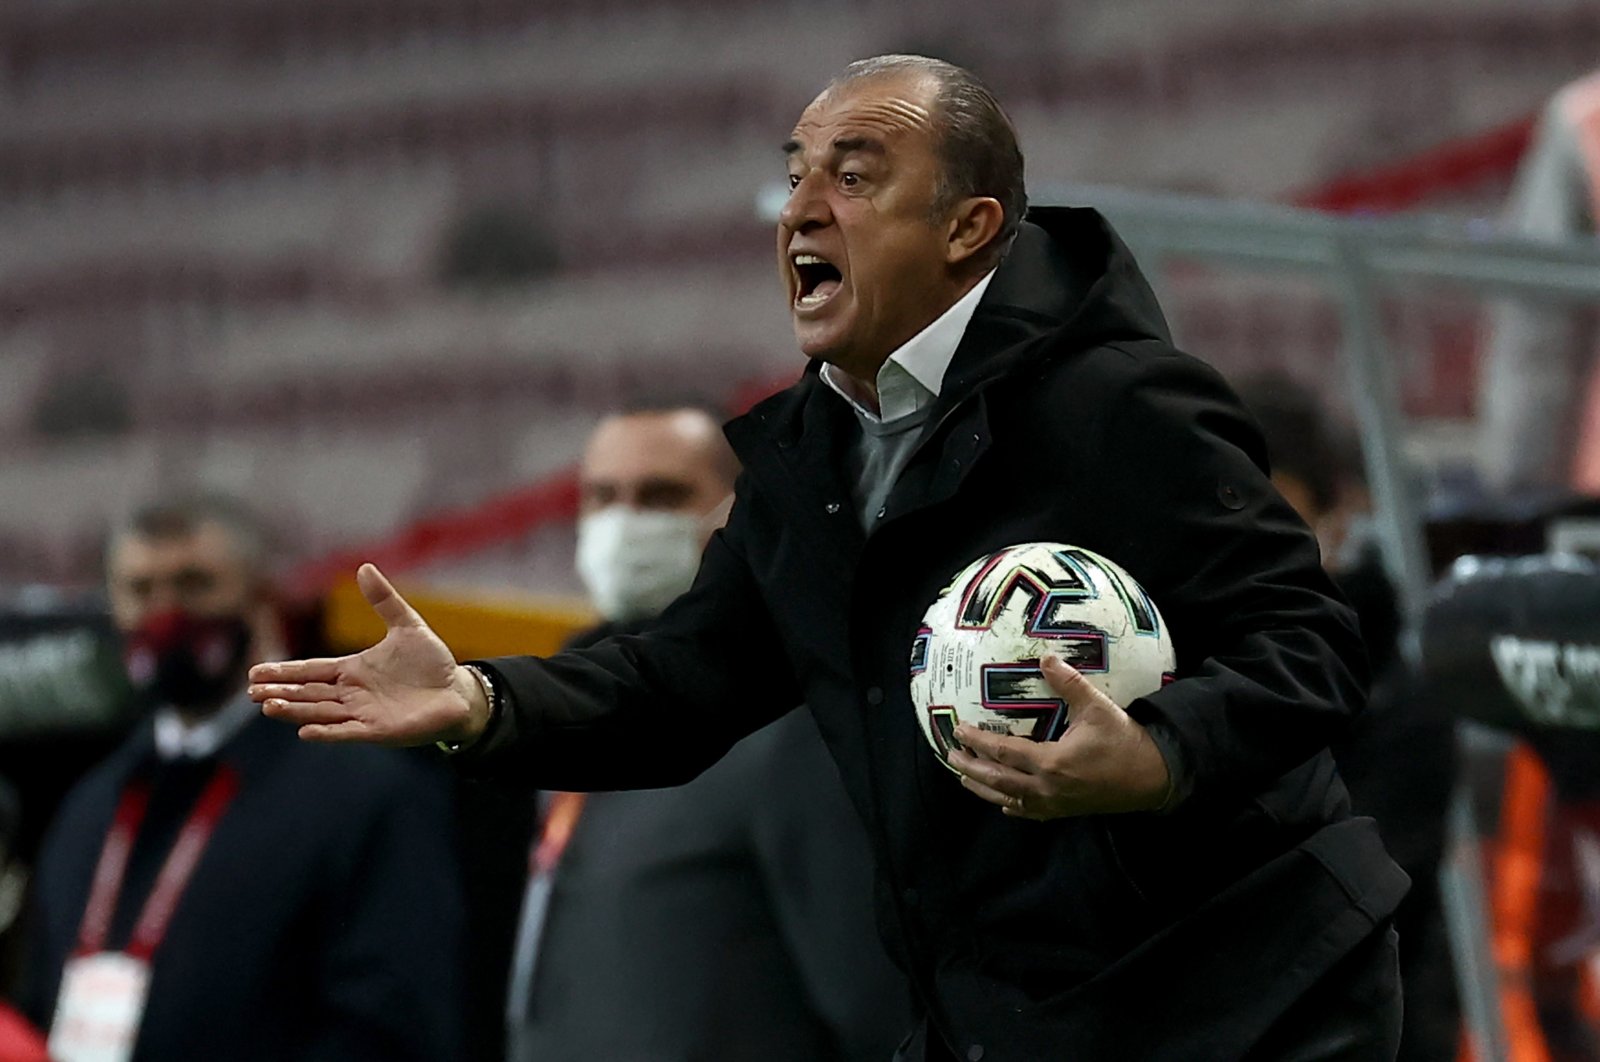 Galatasaray manager Fatih Terim gestures during a Süper Lig match against Rizespor, Istanbul, Turkey, March 19, 2021. (AA Photo)